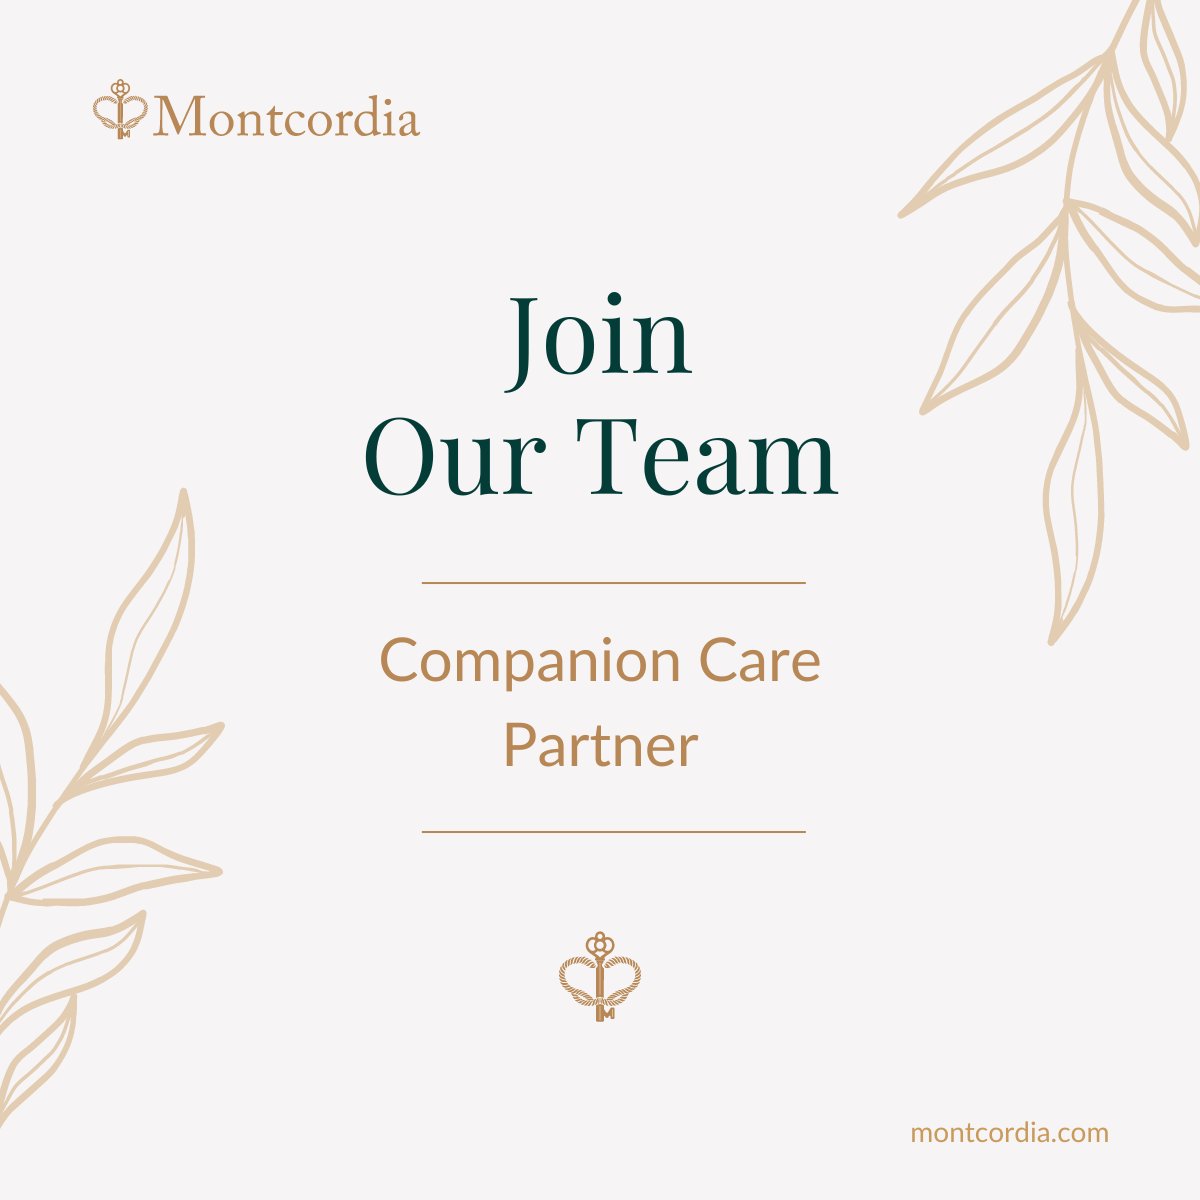 Montcordia is looking for experienced #CompanionCare Partners to join our team! If interested, please follow the link for more details and application: montcordia.acquiretm.com/home.aspx. To learn more about Montcordia, please visit our website at montcordia.com.